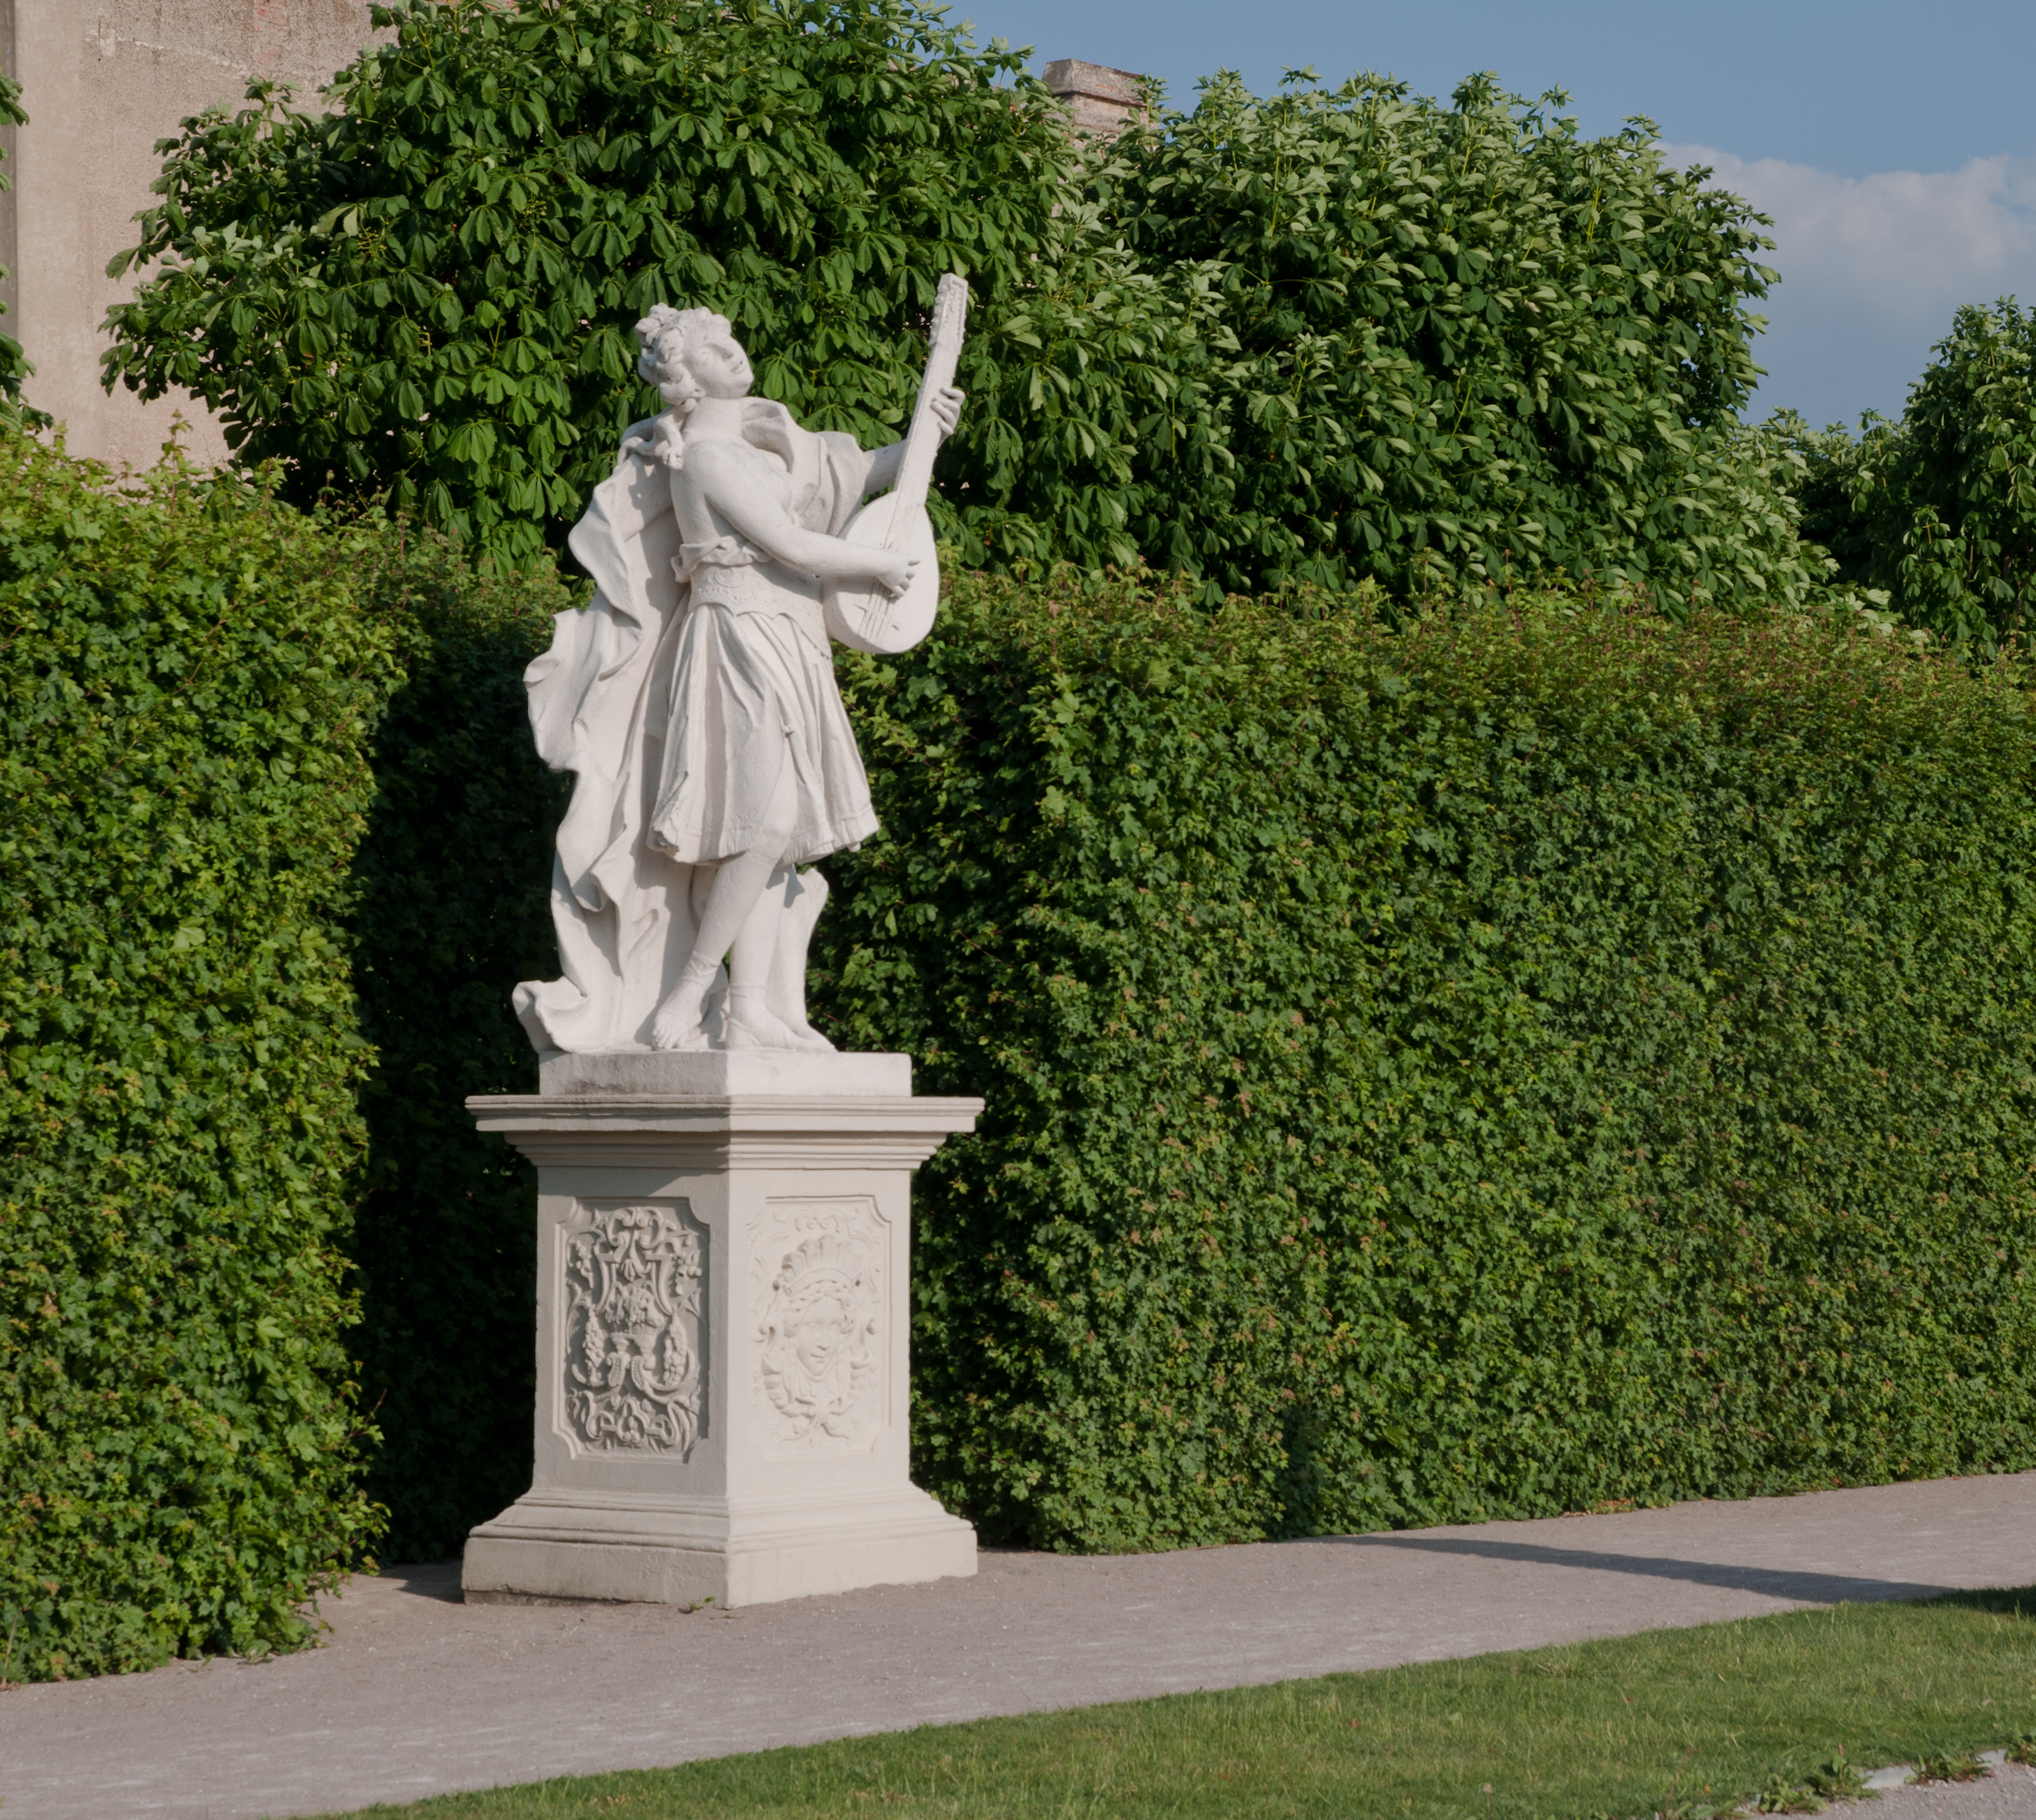 A garden statue positioned amongst the wall hedges